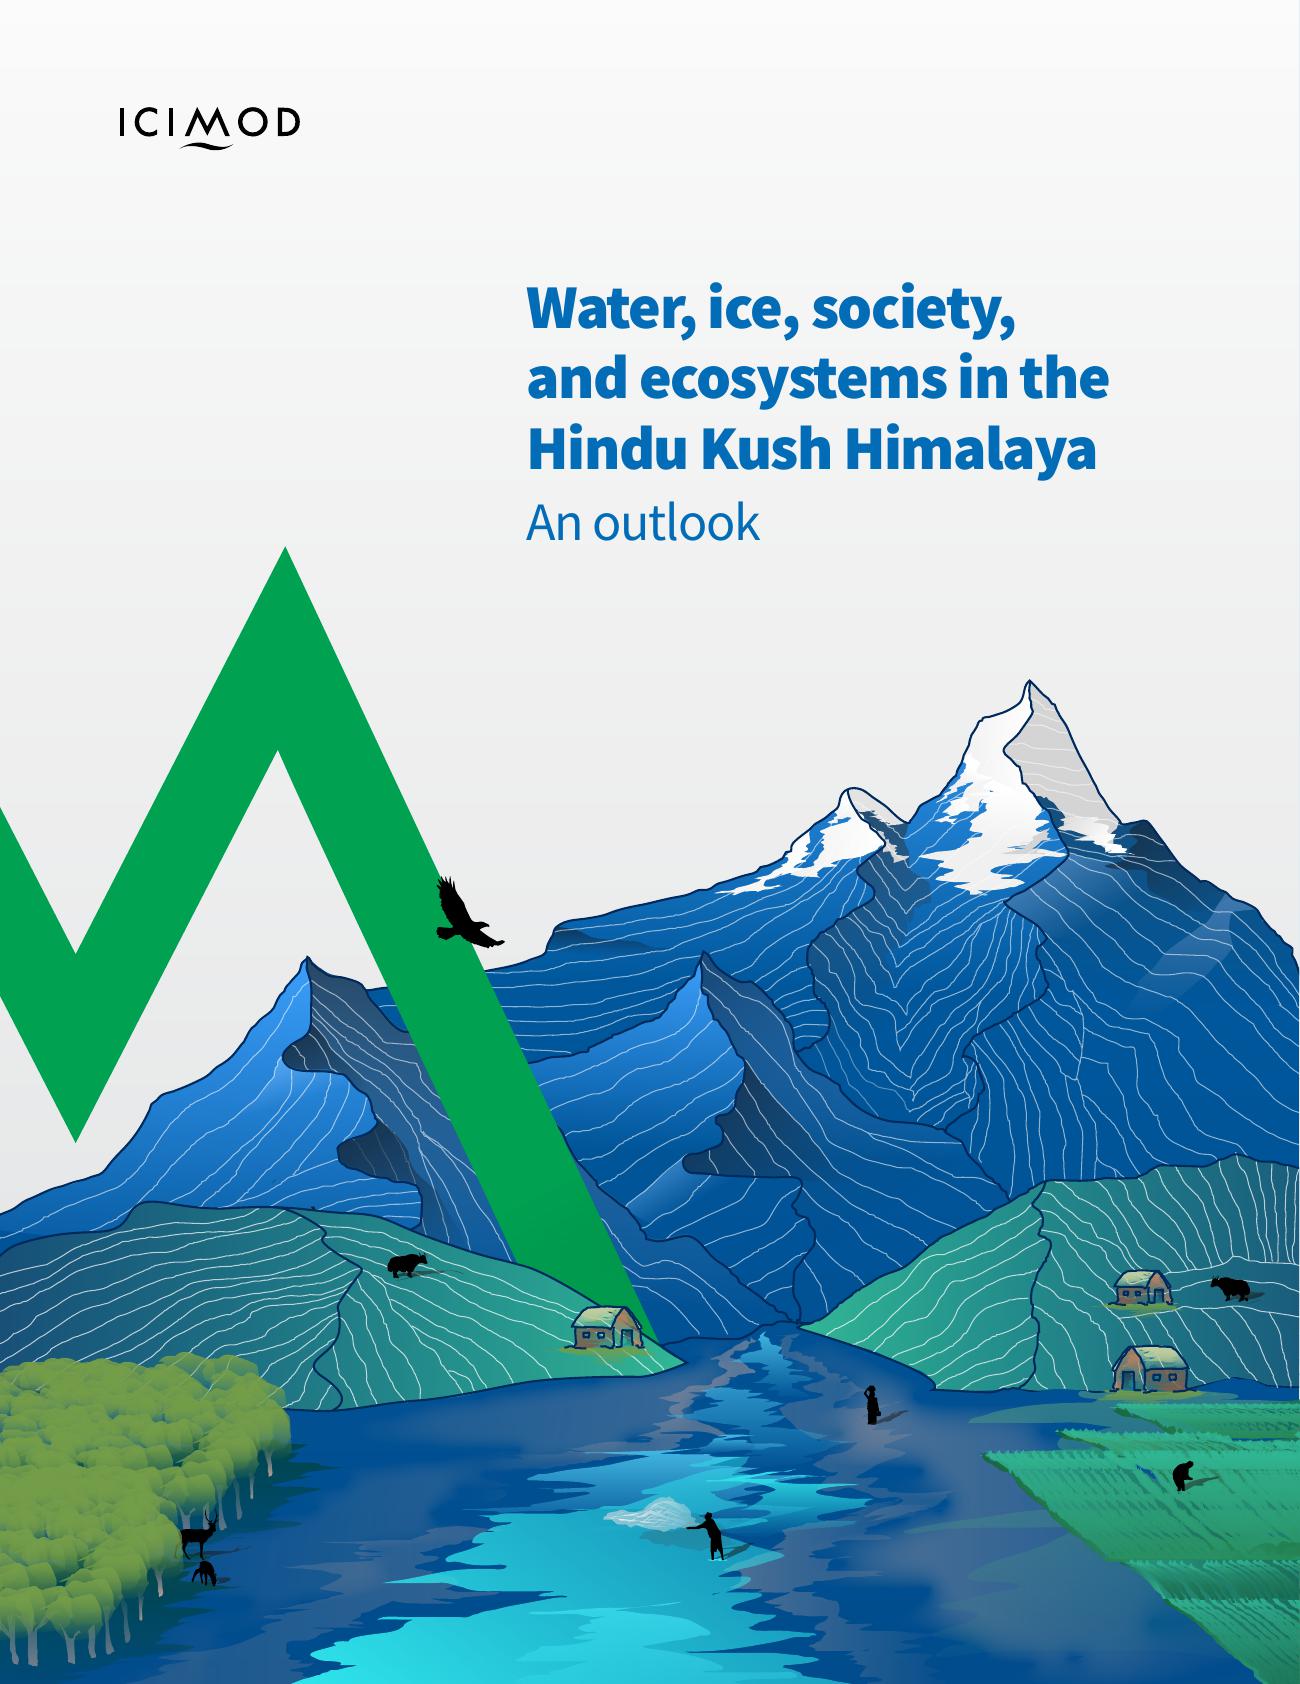 Water, ice, society, and ecosystems in the Hindu Kush Himalaya: An outlook